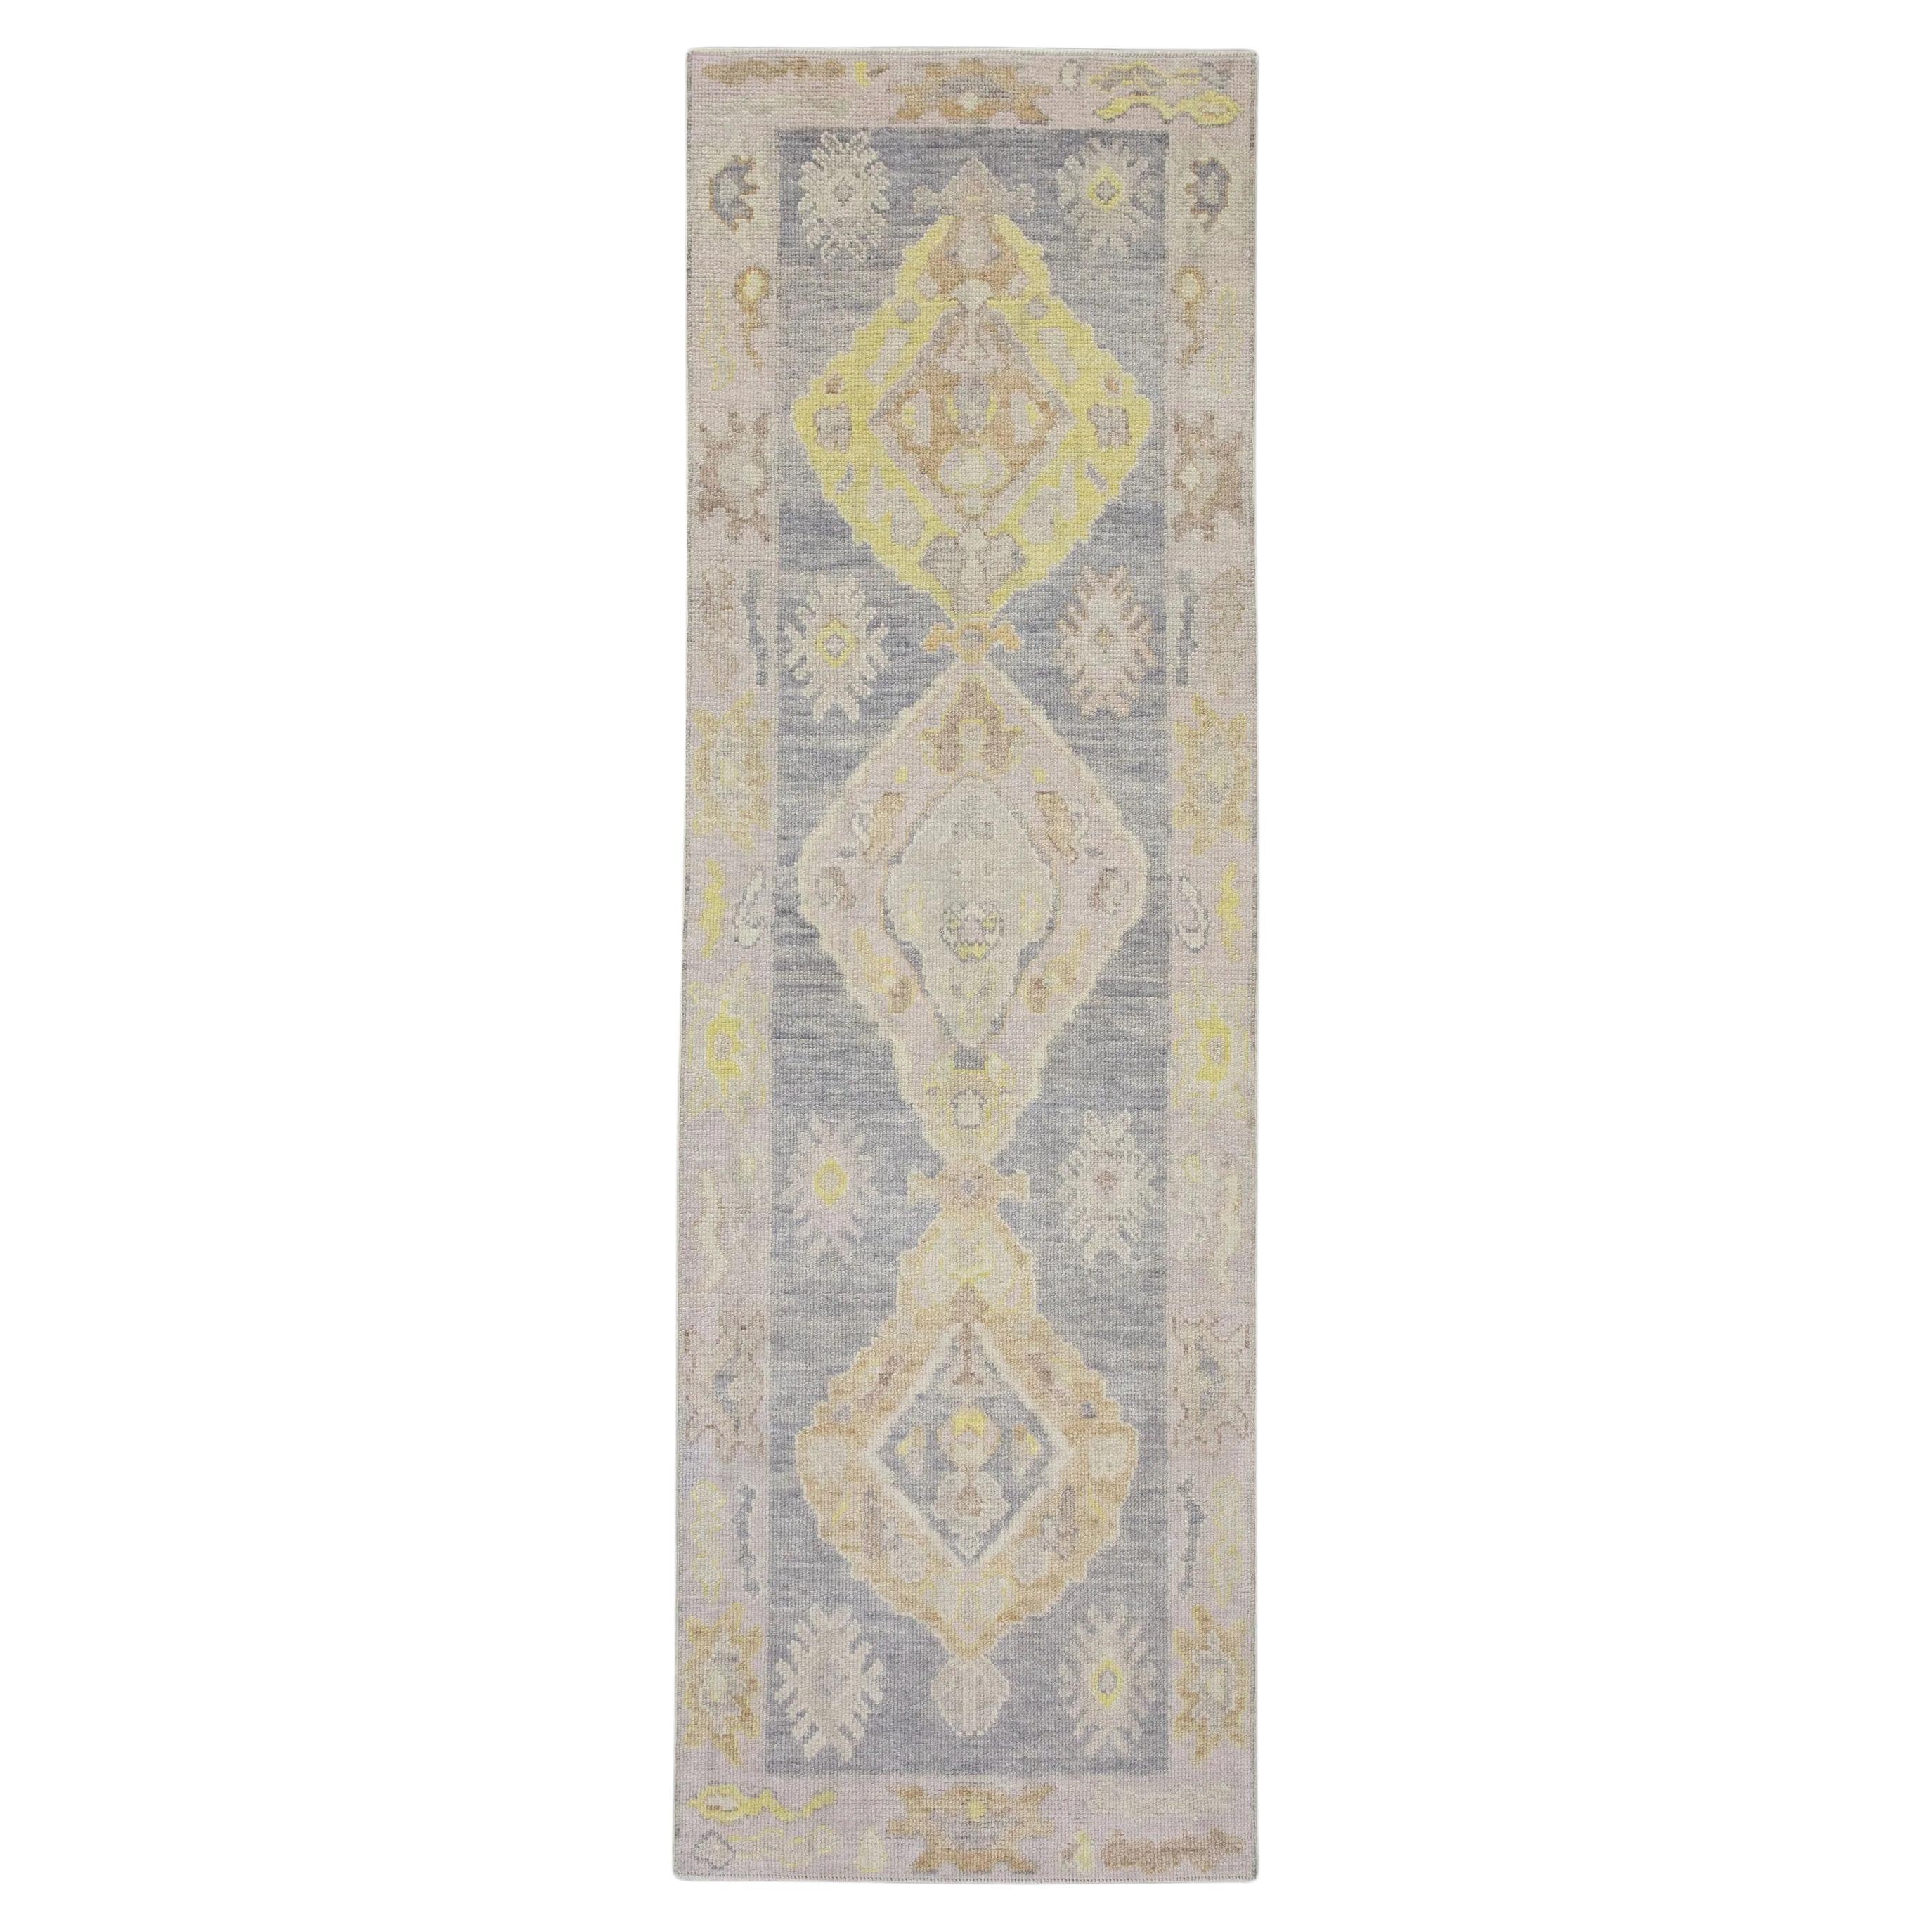 Purple and Yellow Floral Handwoven Wool Turkish Oushak Rug 2'9" x 8'4"